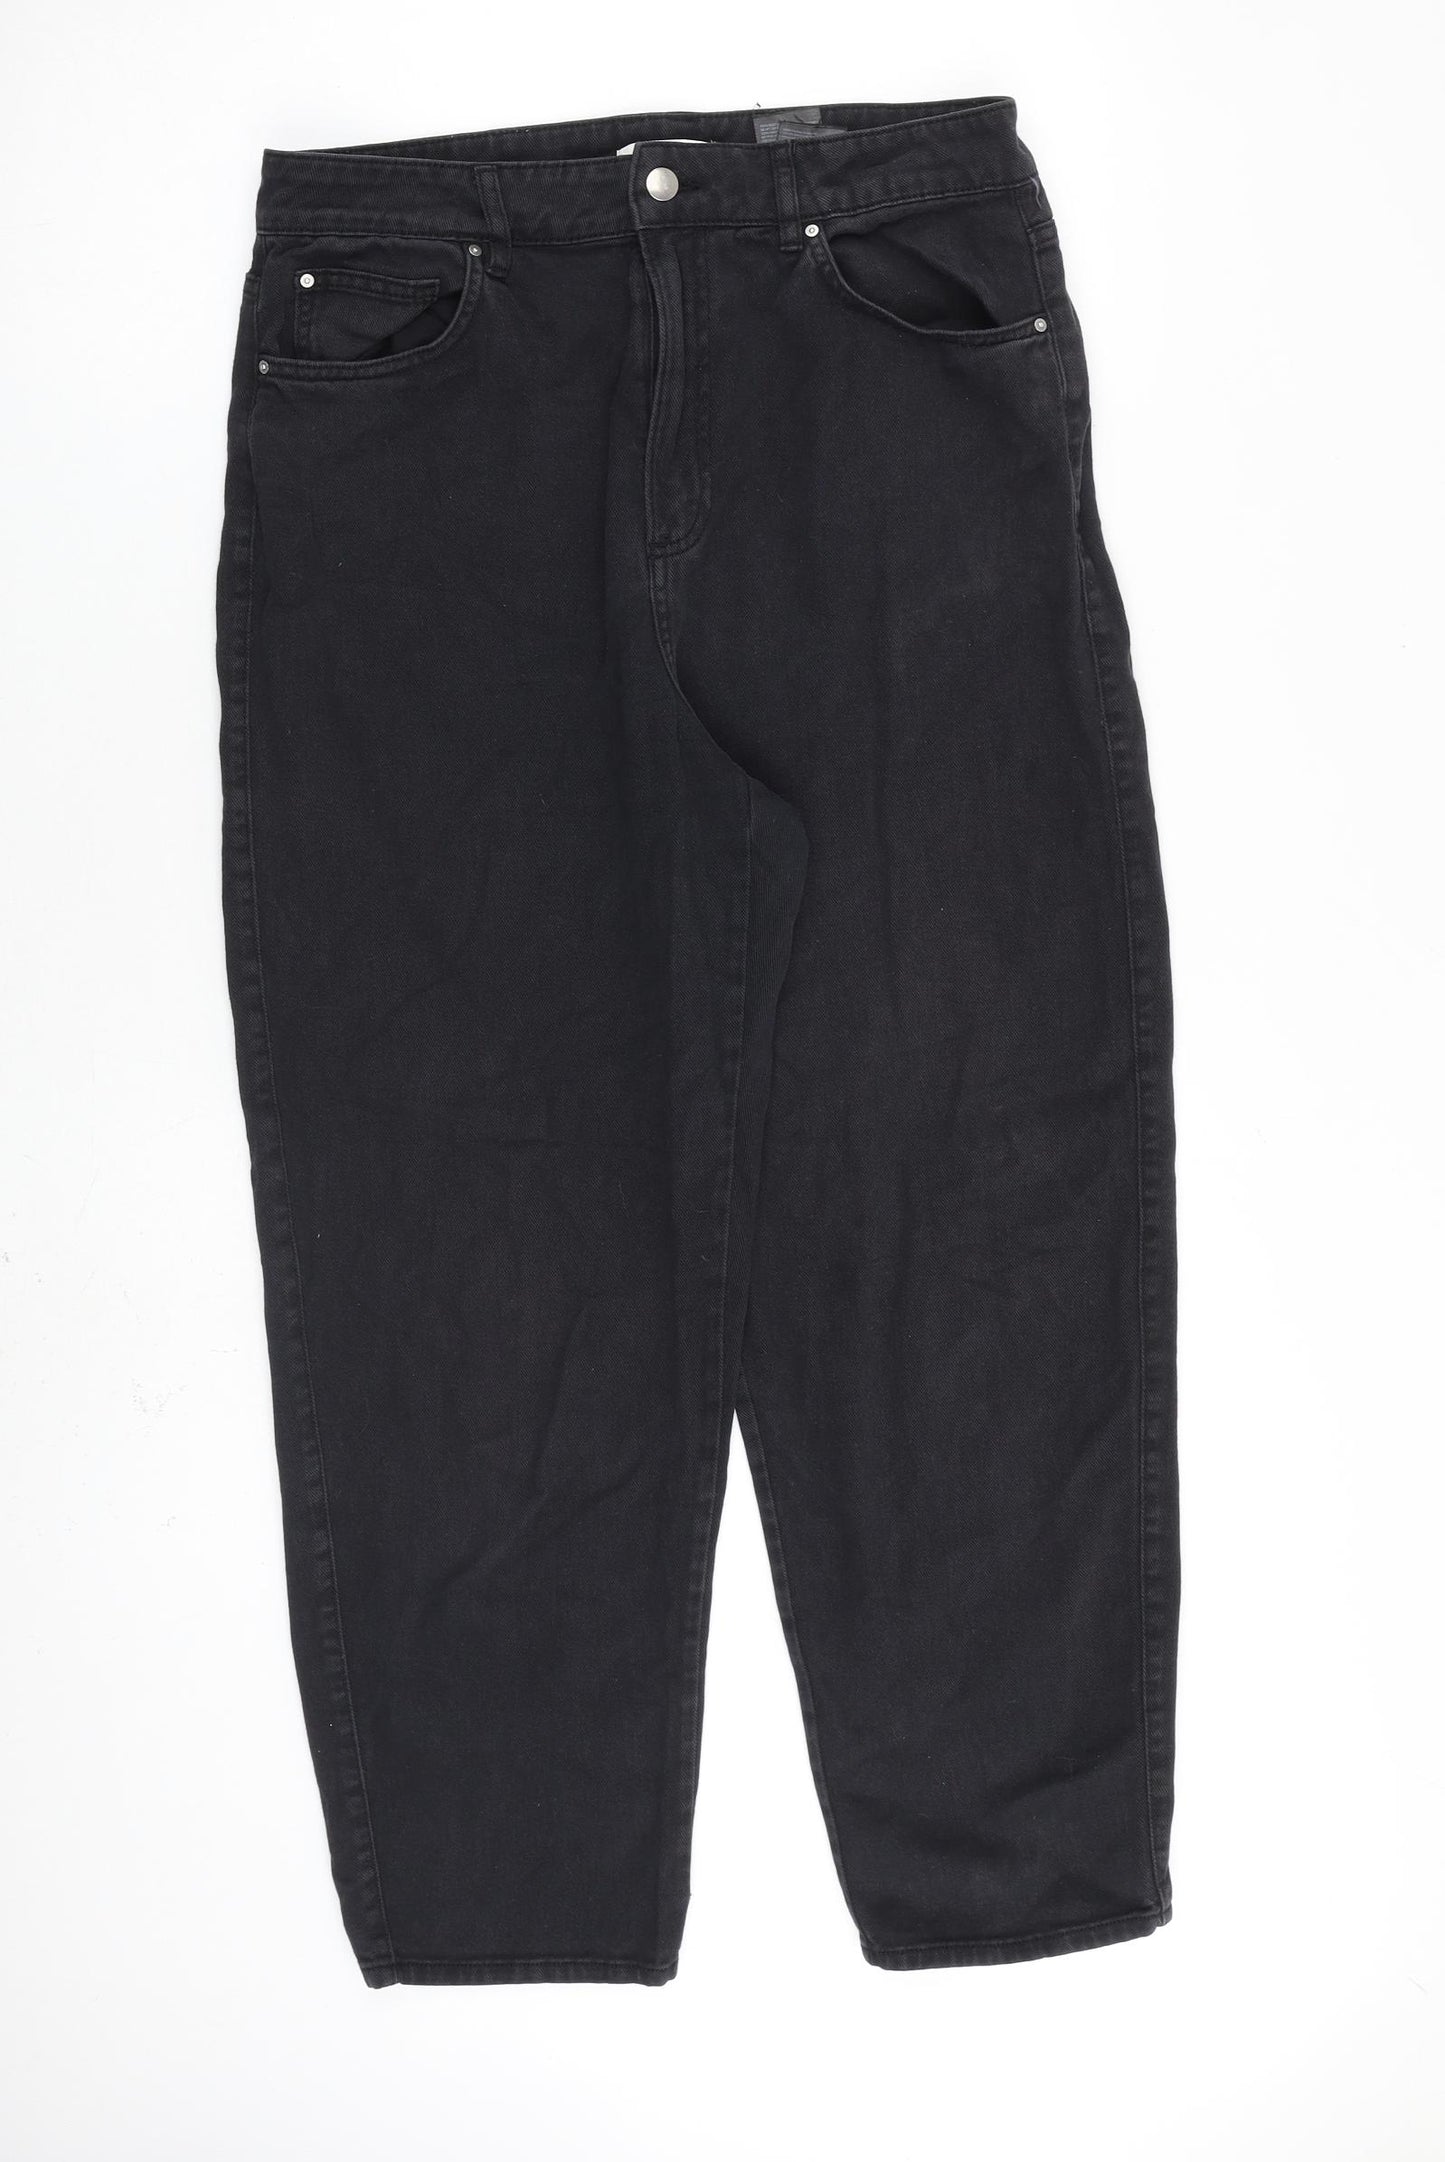 H&M Womens Black Cotton Tapered Jeans Size 14 L26 in Regular Zip